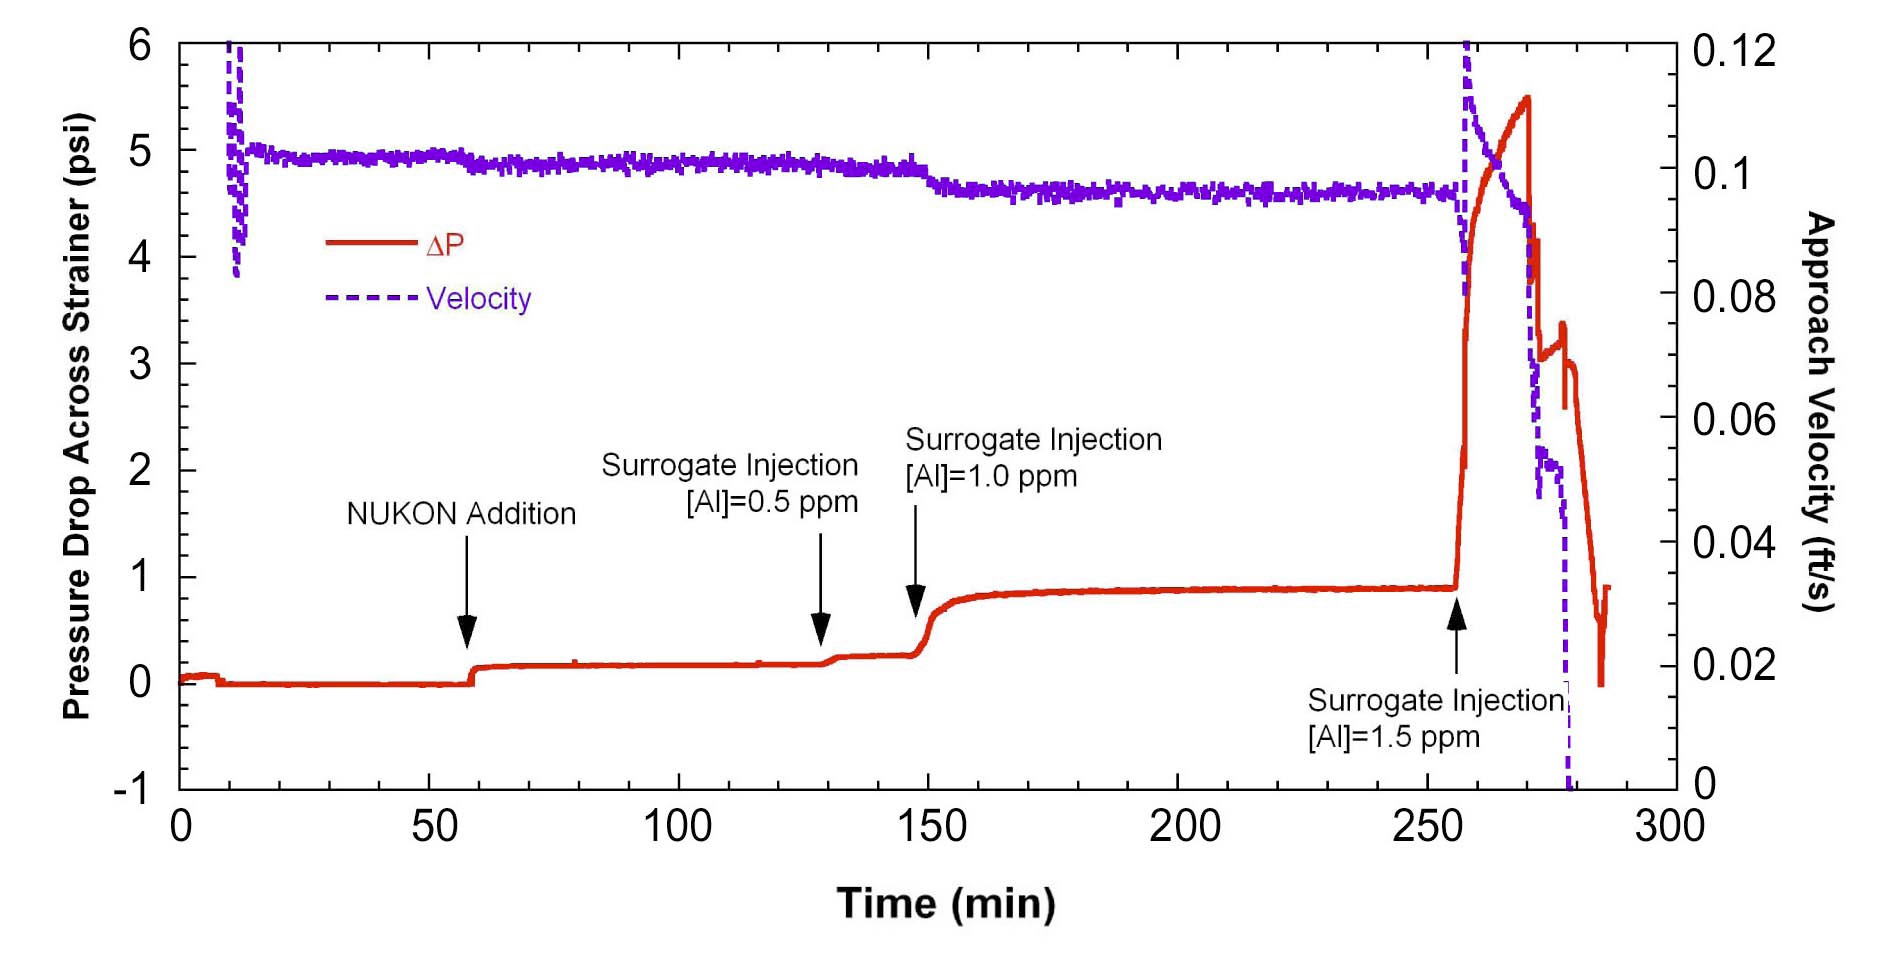 Pressure Drop and Strainer Approach Velocity vs. Time in a Loop Test using the WCAP16530-NP Aluminum Hydroxide Surrogates [22]. 1 psi=6.895 kPa; 0.1 ft/s=0.03 m/s.